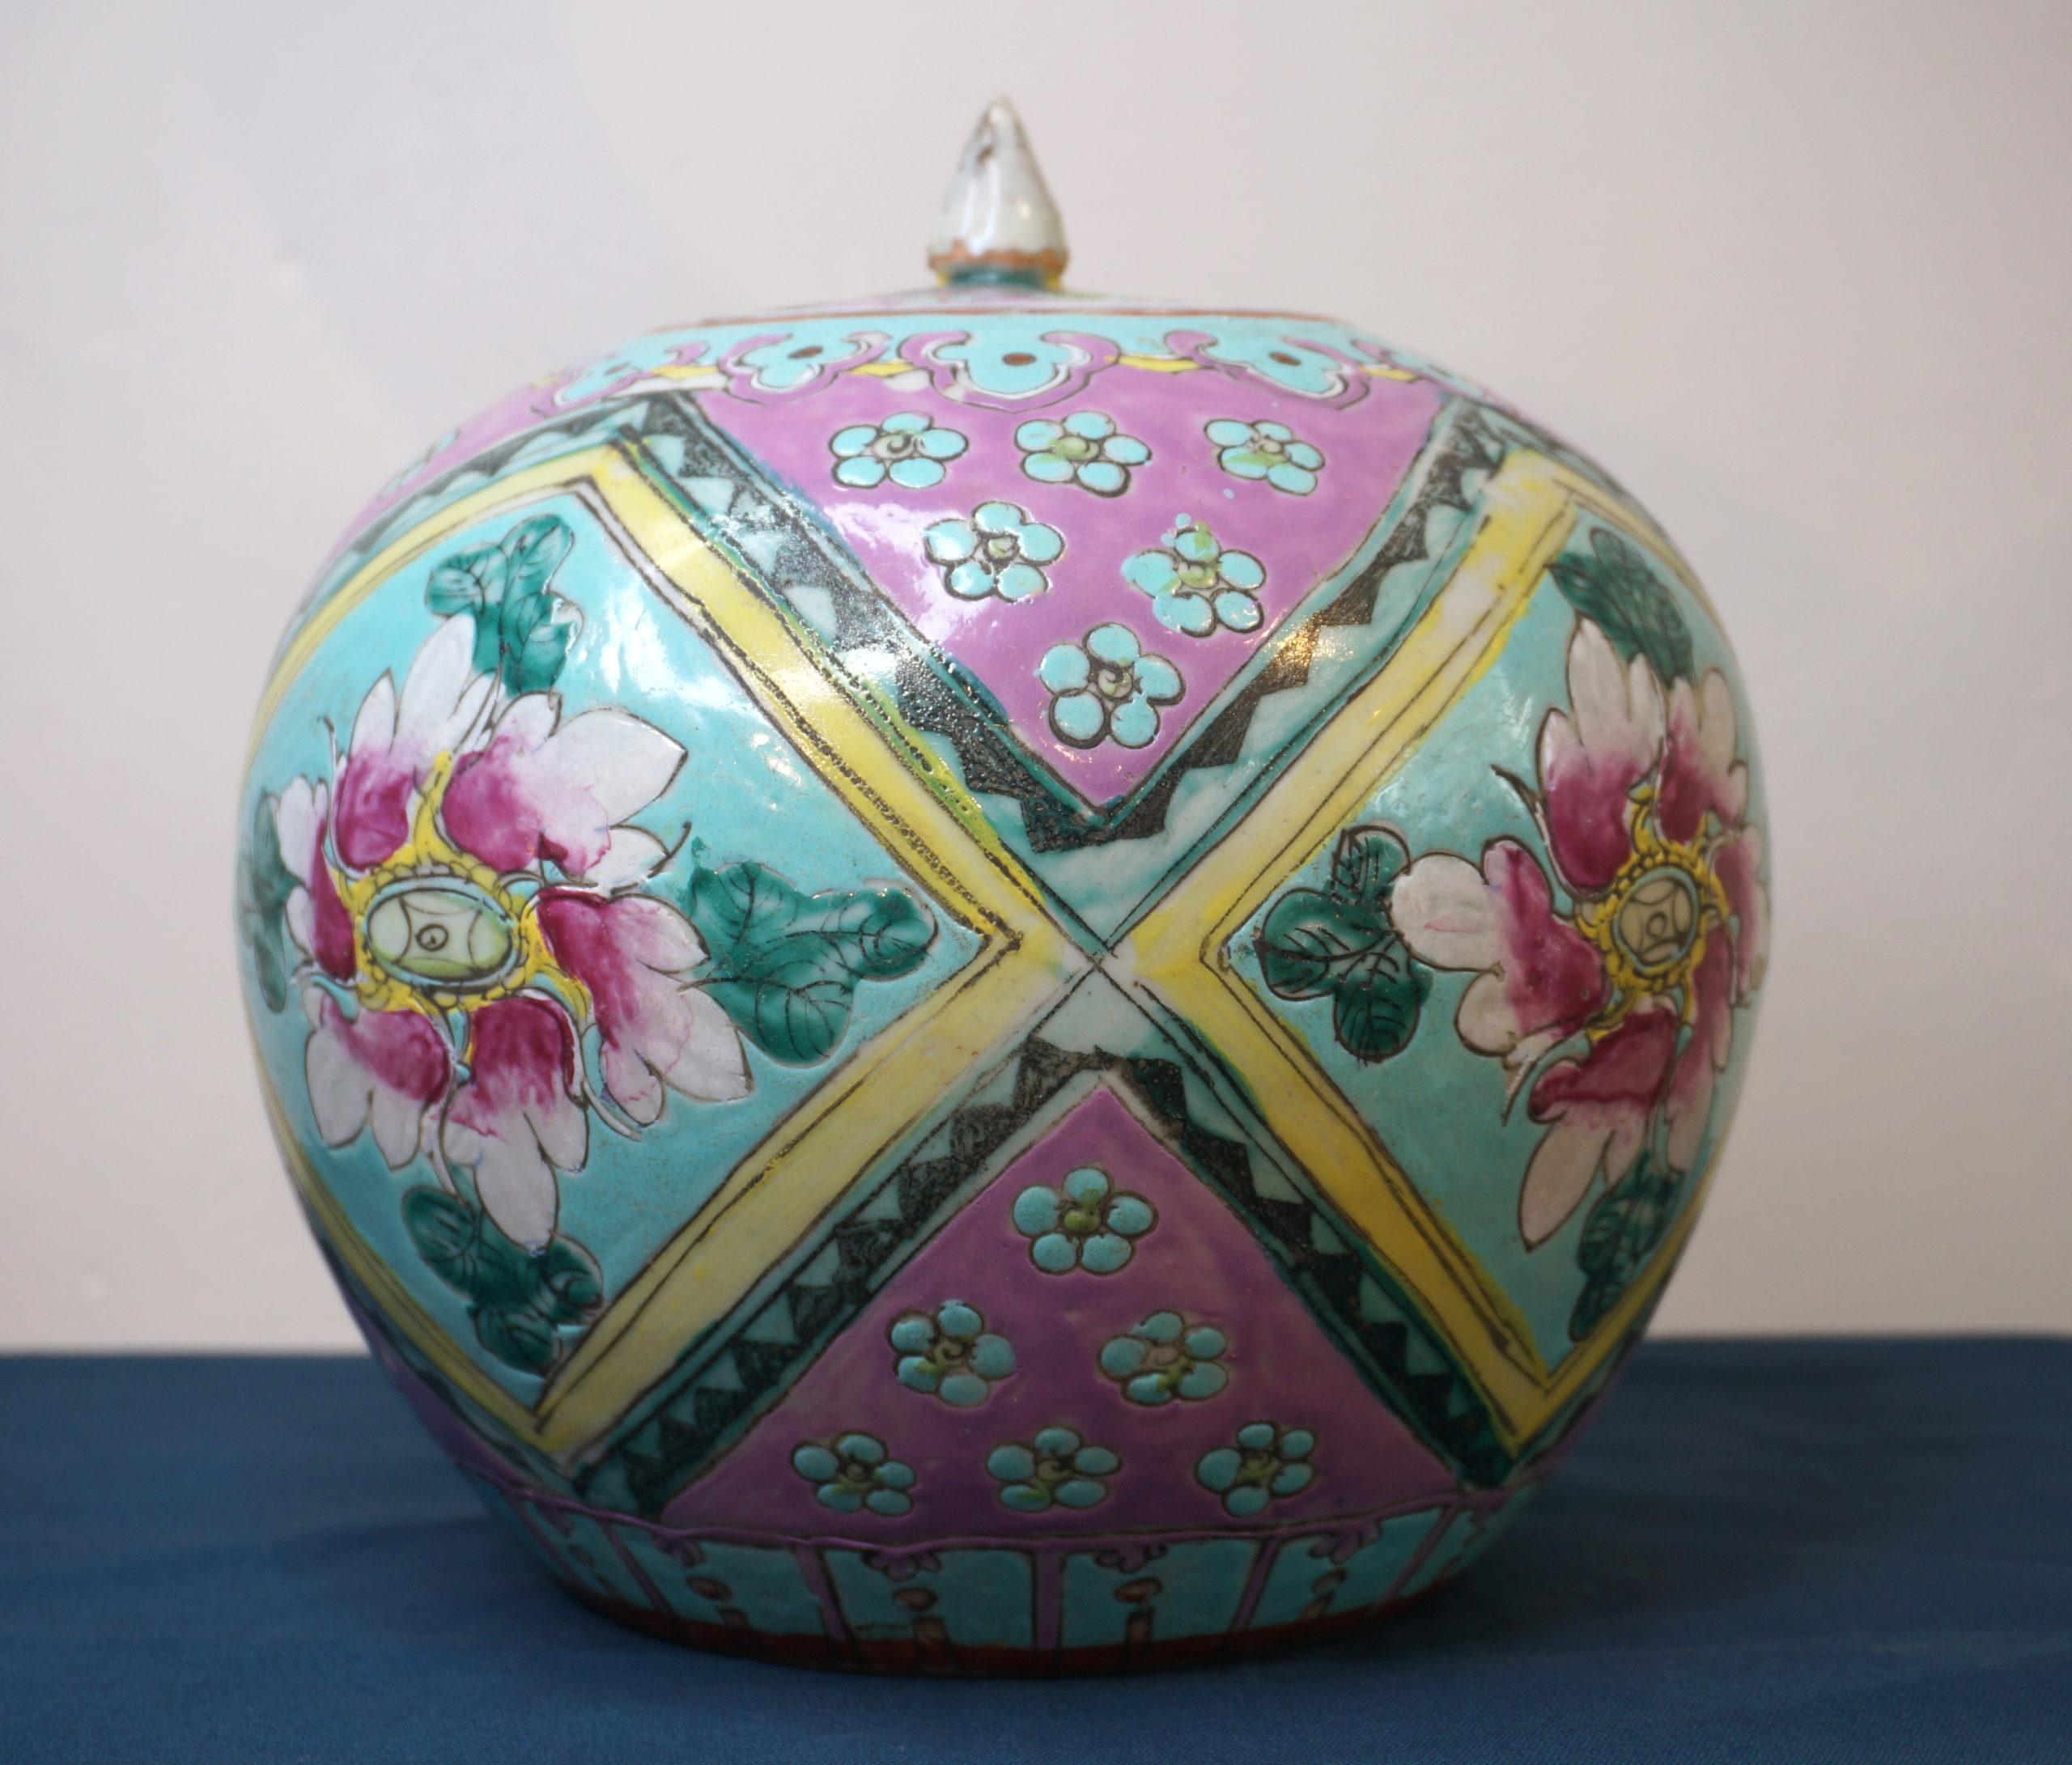 Chinese porcelain ginger jar with floral decorations in bright and vibrant colours, made for the South-East Asian market.

Made around 1900.

Dimensions: 25 x 22 x 22 cm.

Overall in good condition, some minor damage to the glaze and some minor